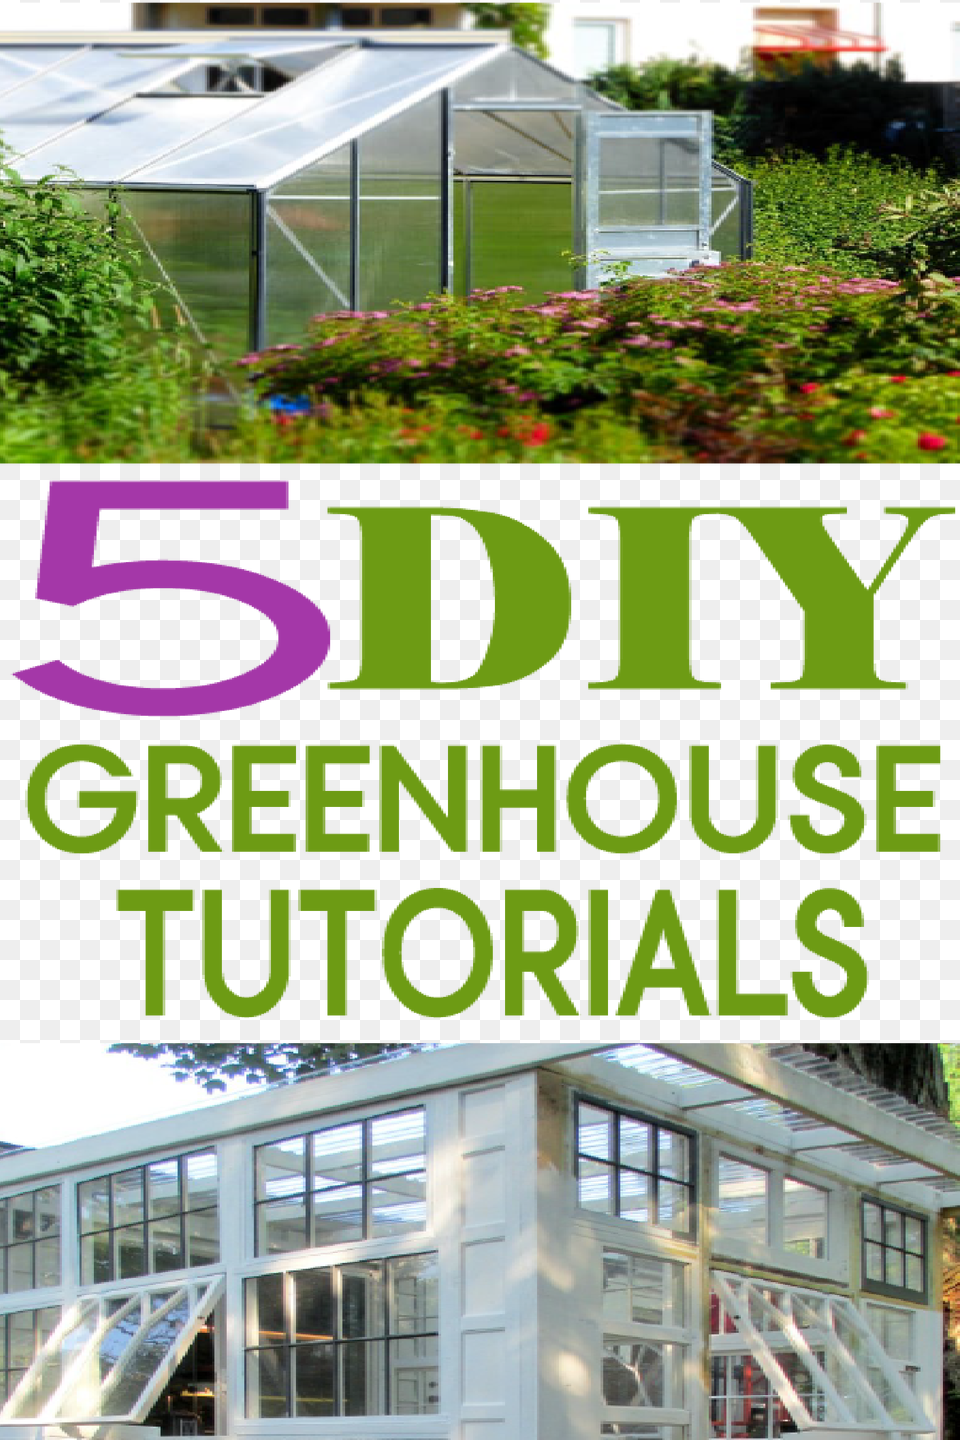 Build Your Own Greenhouse, Nature, Outdoors, Garden, Gardening Png